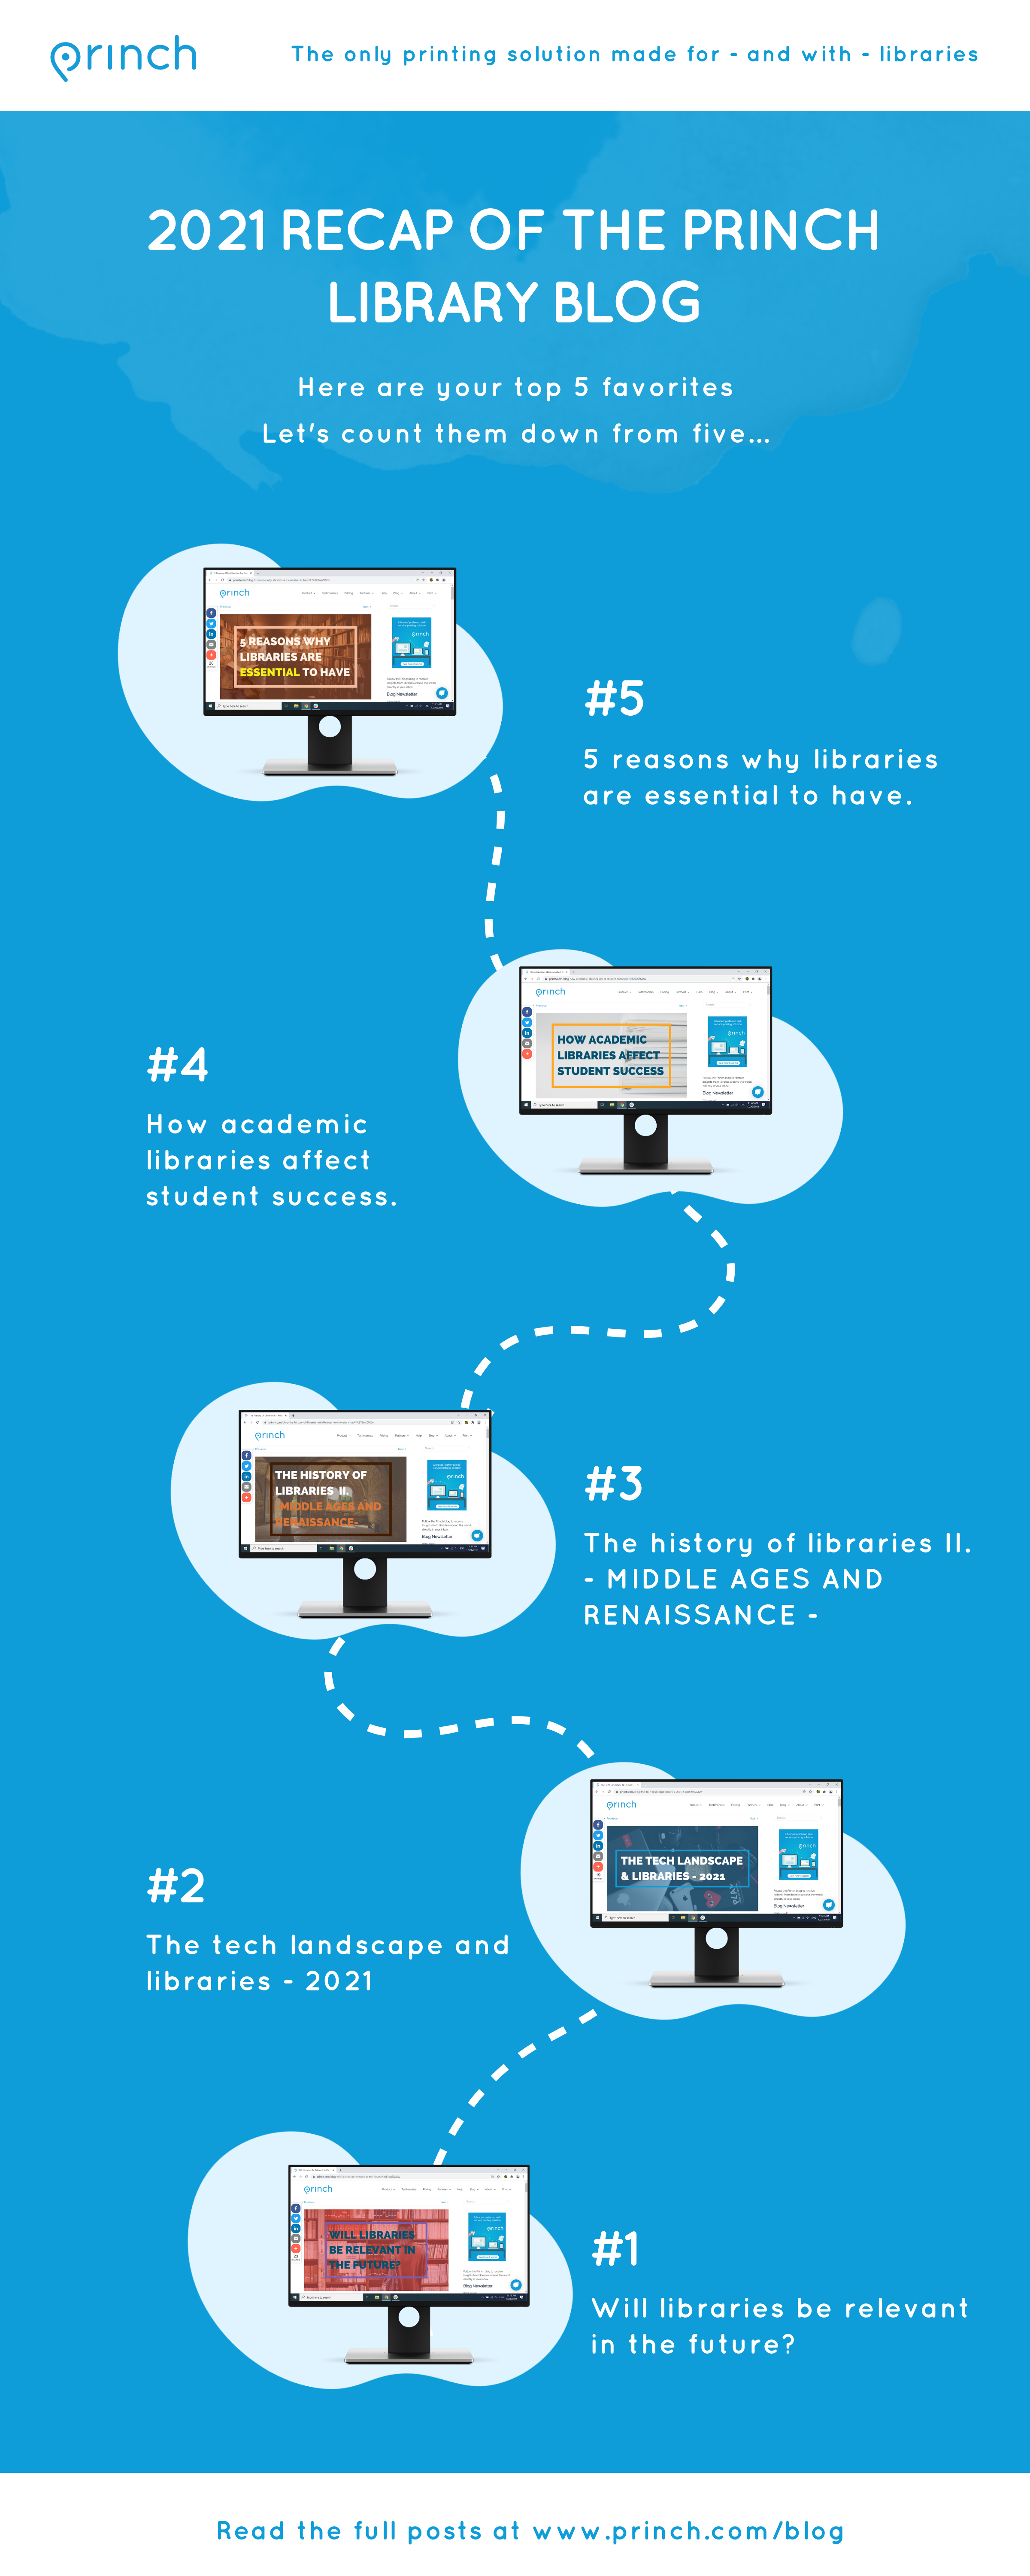 Princh Library Blog Top 5 Posts 2021 Infographic